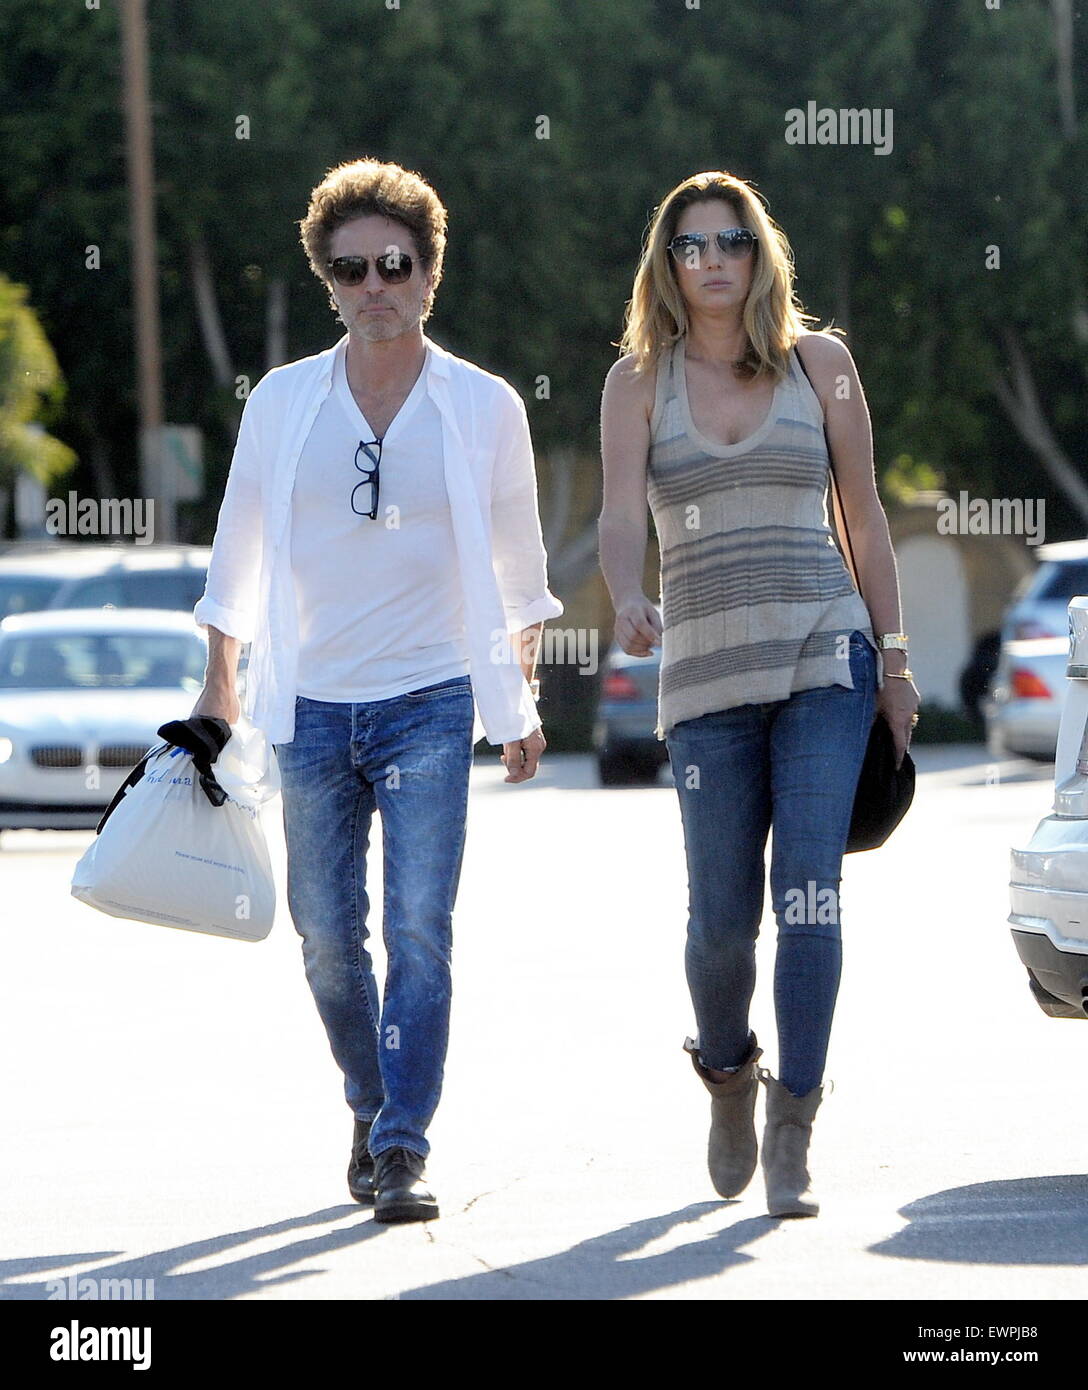 Model Daisy Fuentes flaunts her famous curves at the age of 48 while out  shopping with her new boyfriend singer Richard Marx. The new couple were  seen holding hands while shopping at